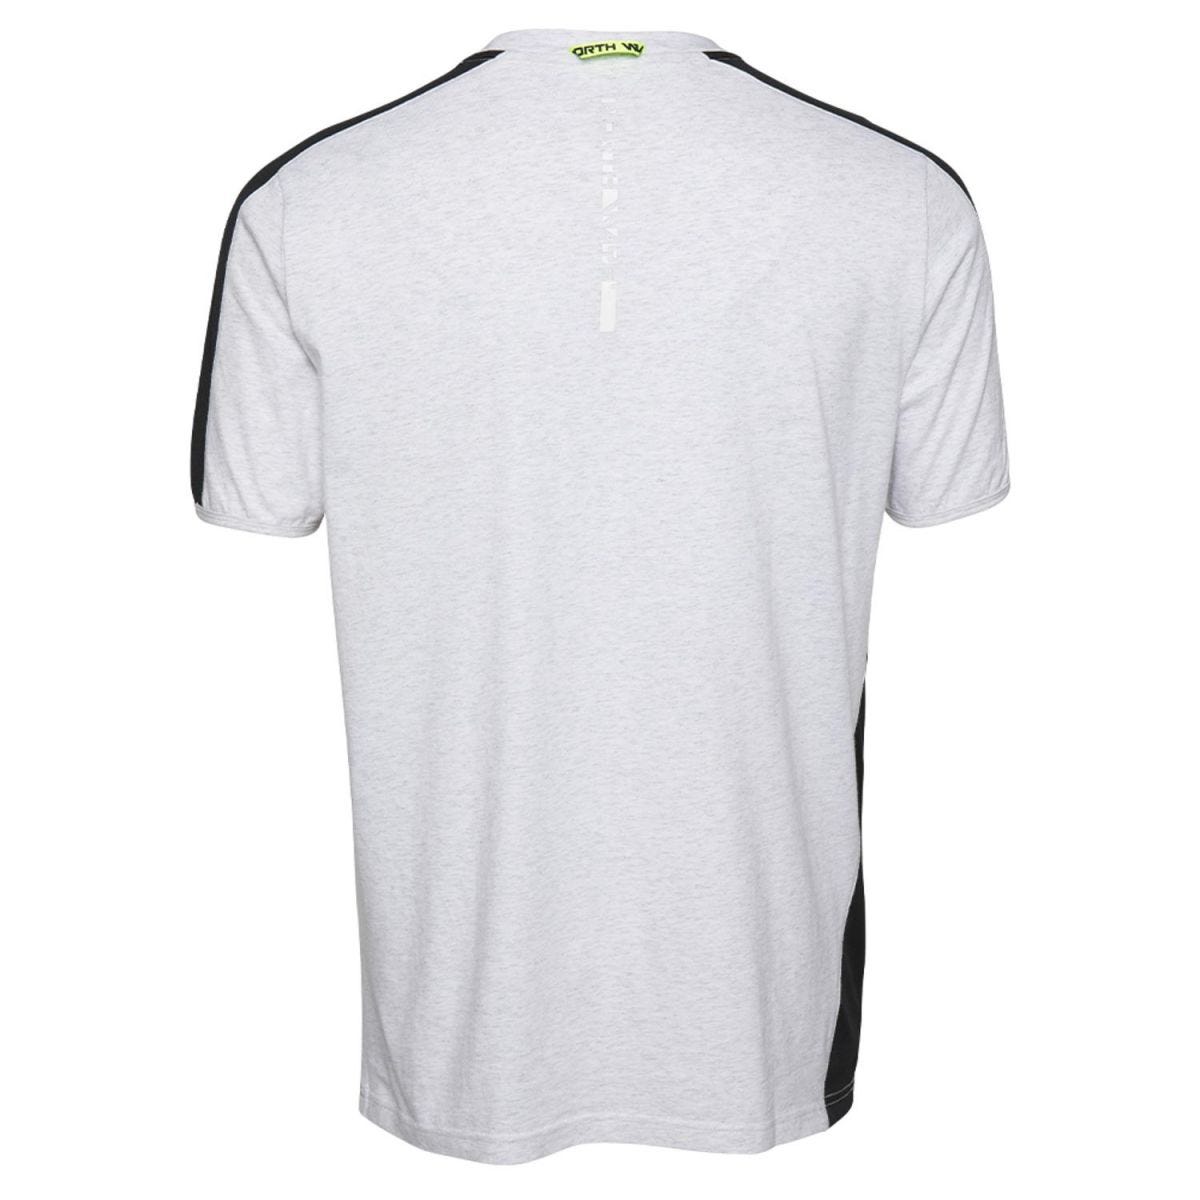 Tee-shirt à manches courtes pour homme Andy blanc chiné - North Ways - Taille 3XL 1